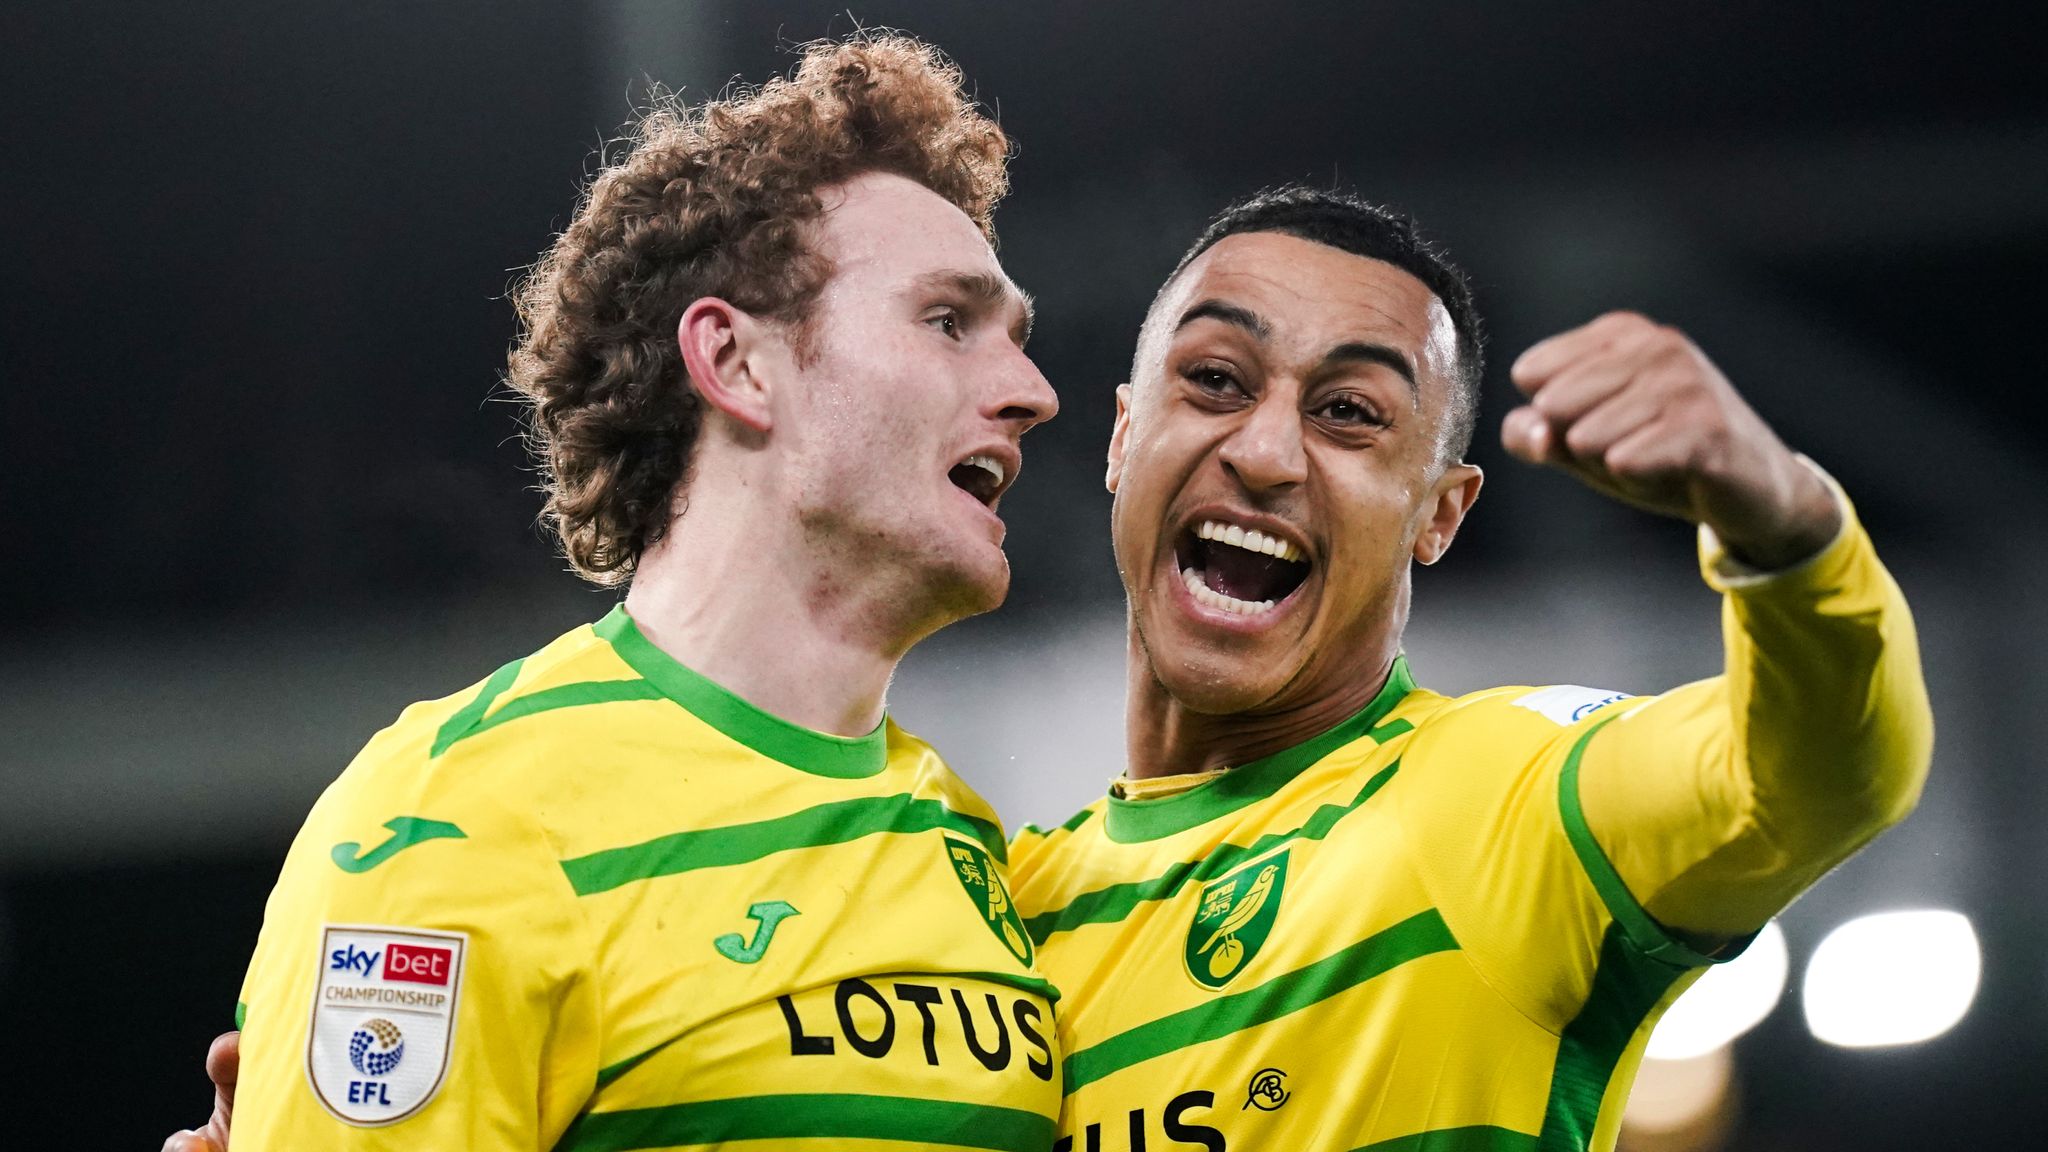 Norwich City 1-1 Southampton: Josh Sargent strikes to earn Canaries a point as Saints extend unbeaten run to 18 games | Football News | Sky Sports